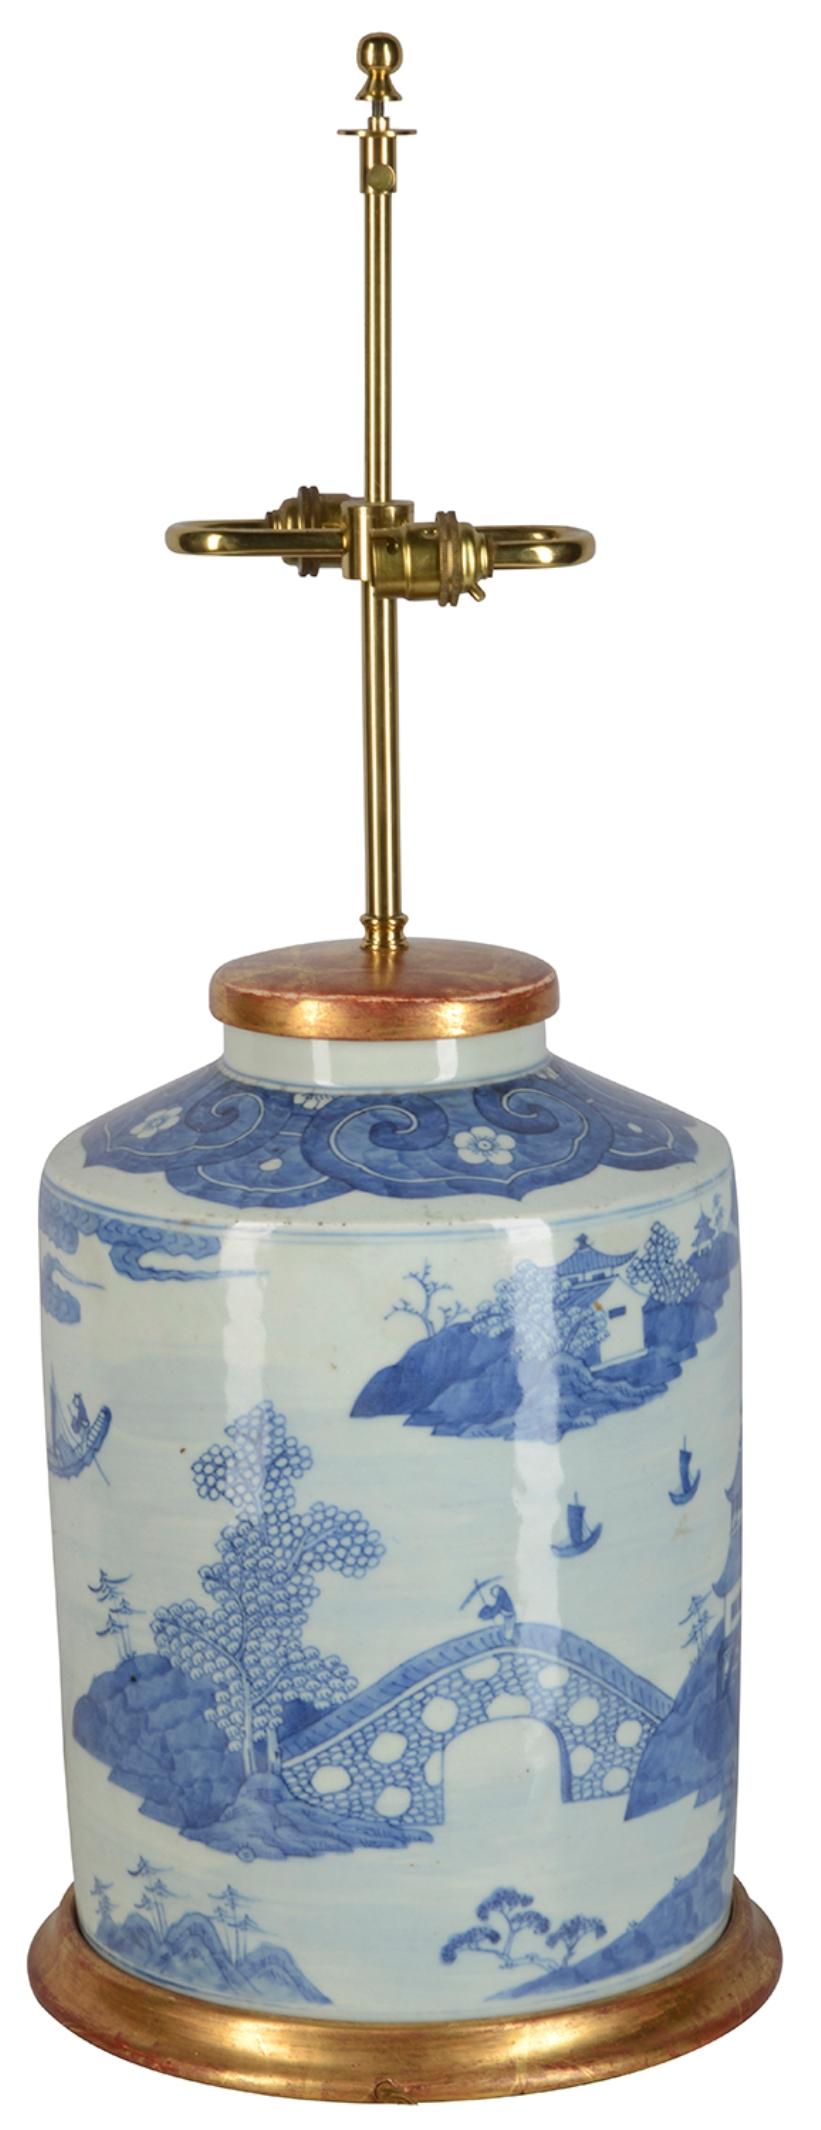 Chinese Export Chinese Blue and White Circular Jar / Lamp, Late 19th Century